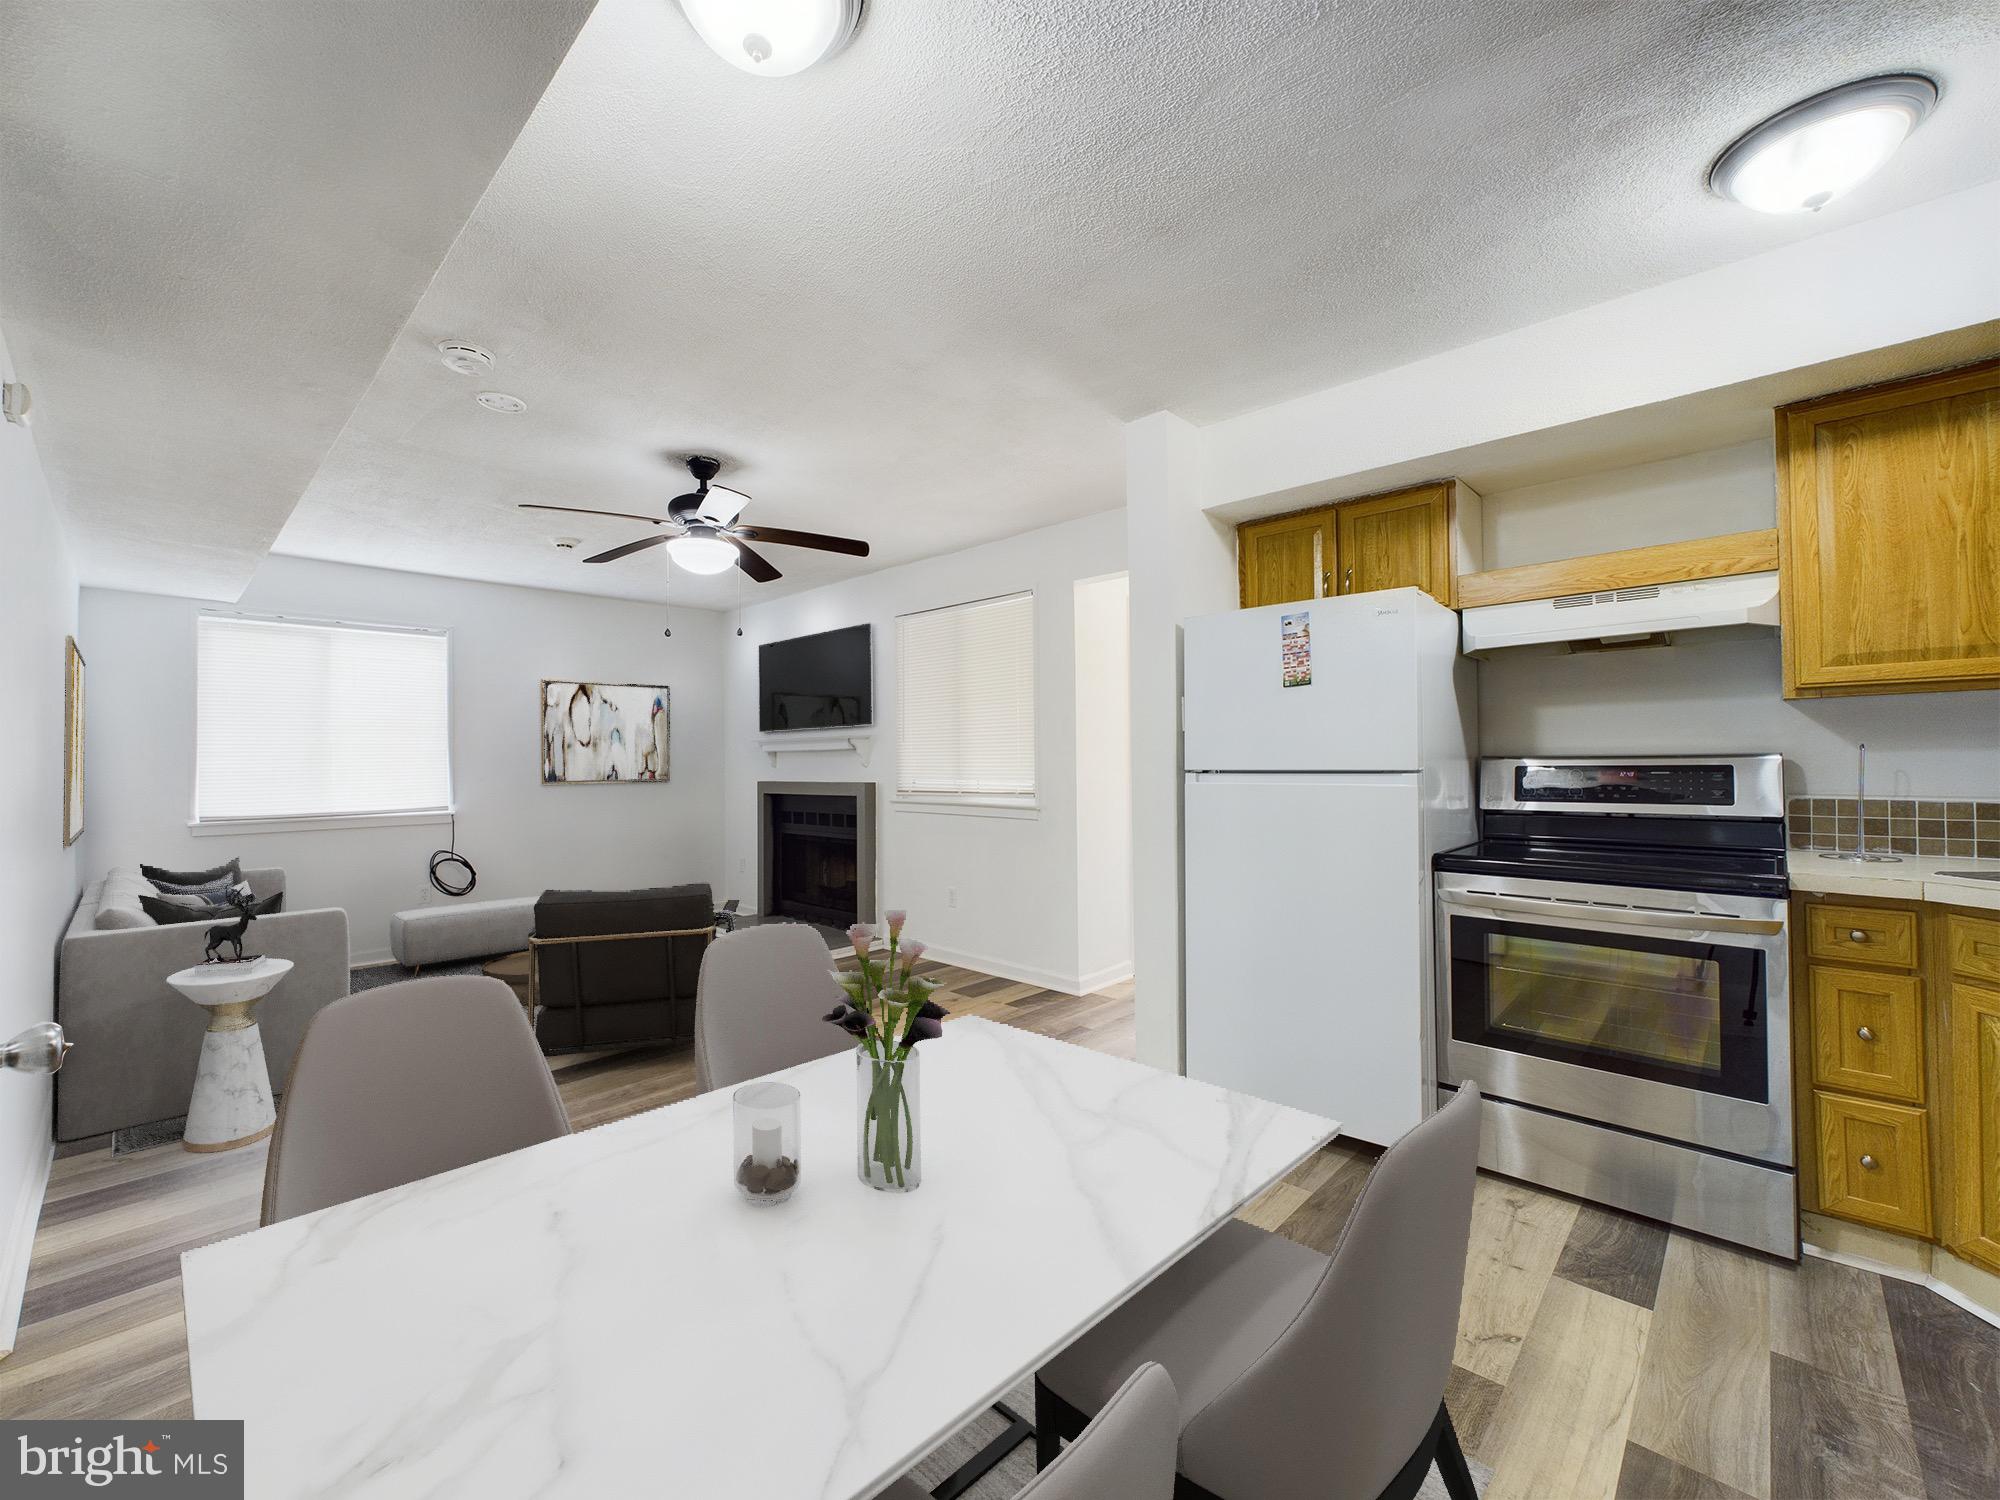 a kitchen with stainless steel appliances kitchen island granite countertop a refrigerator a stove a sink dishwasher a dining table and chairs with wooden floor